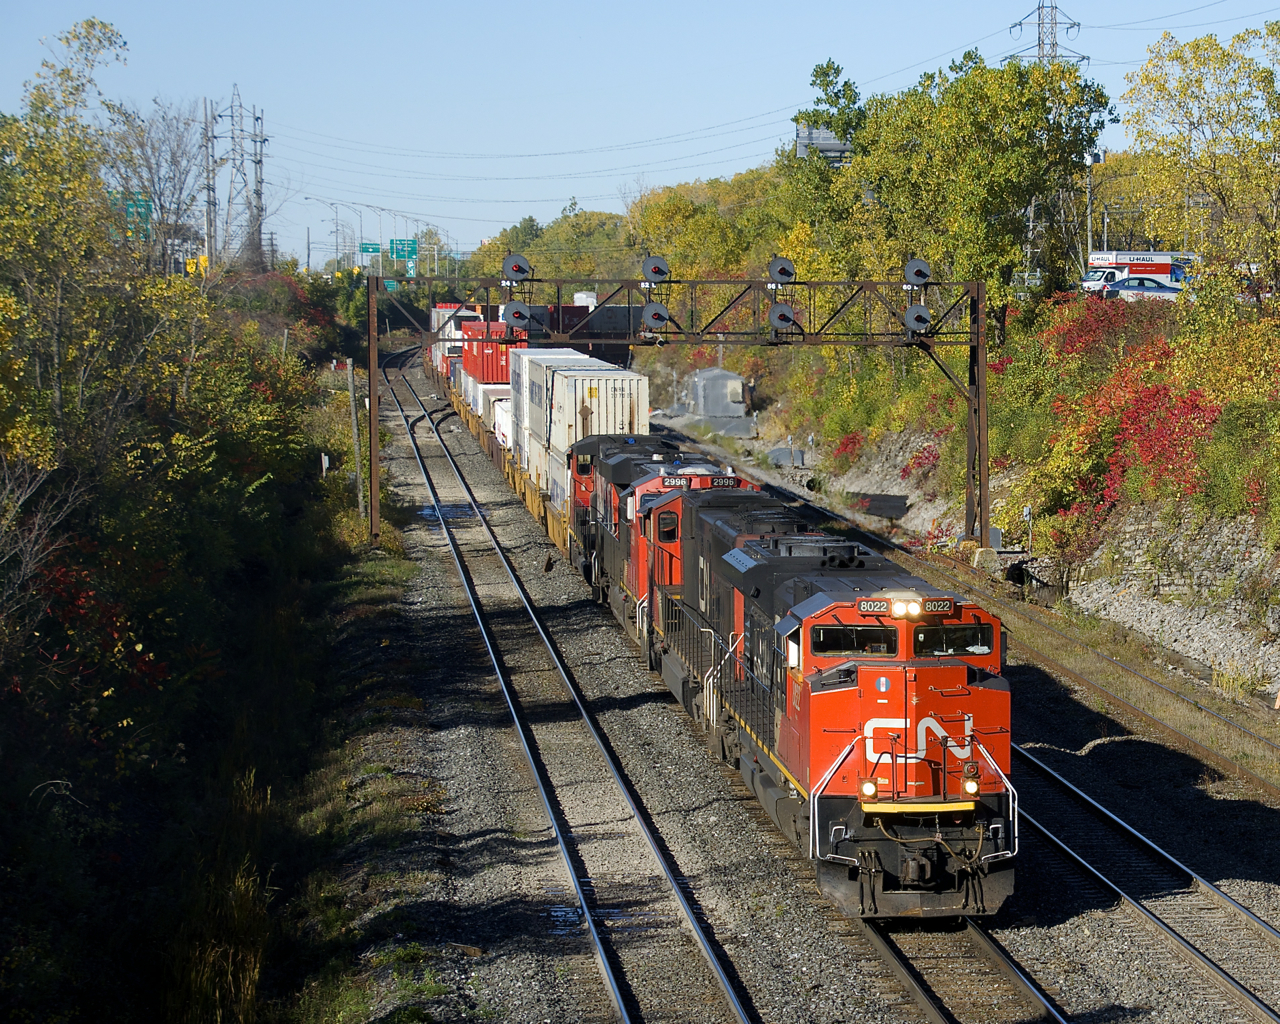 CN 120 has CN 8022, CN 5706, CN 2996 & CN 4802 up front (and CN 8928 mid-train) as it exits Taschereau Yard with intermodal traffic bound for the Maritimes.